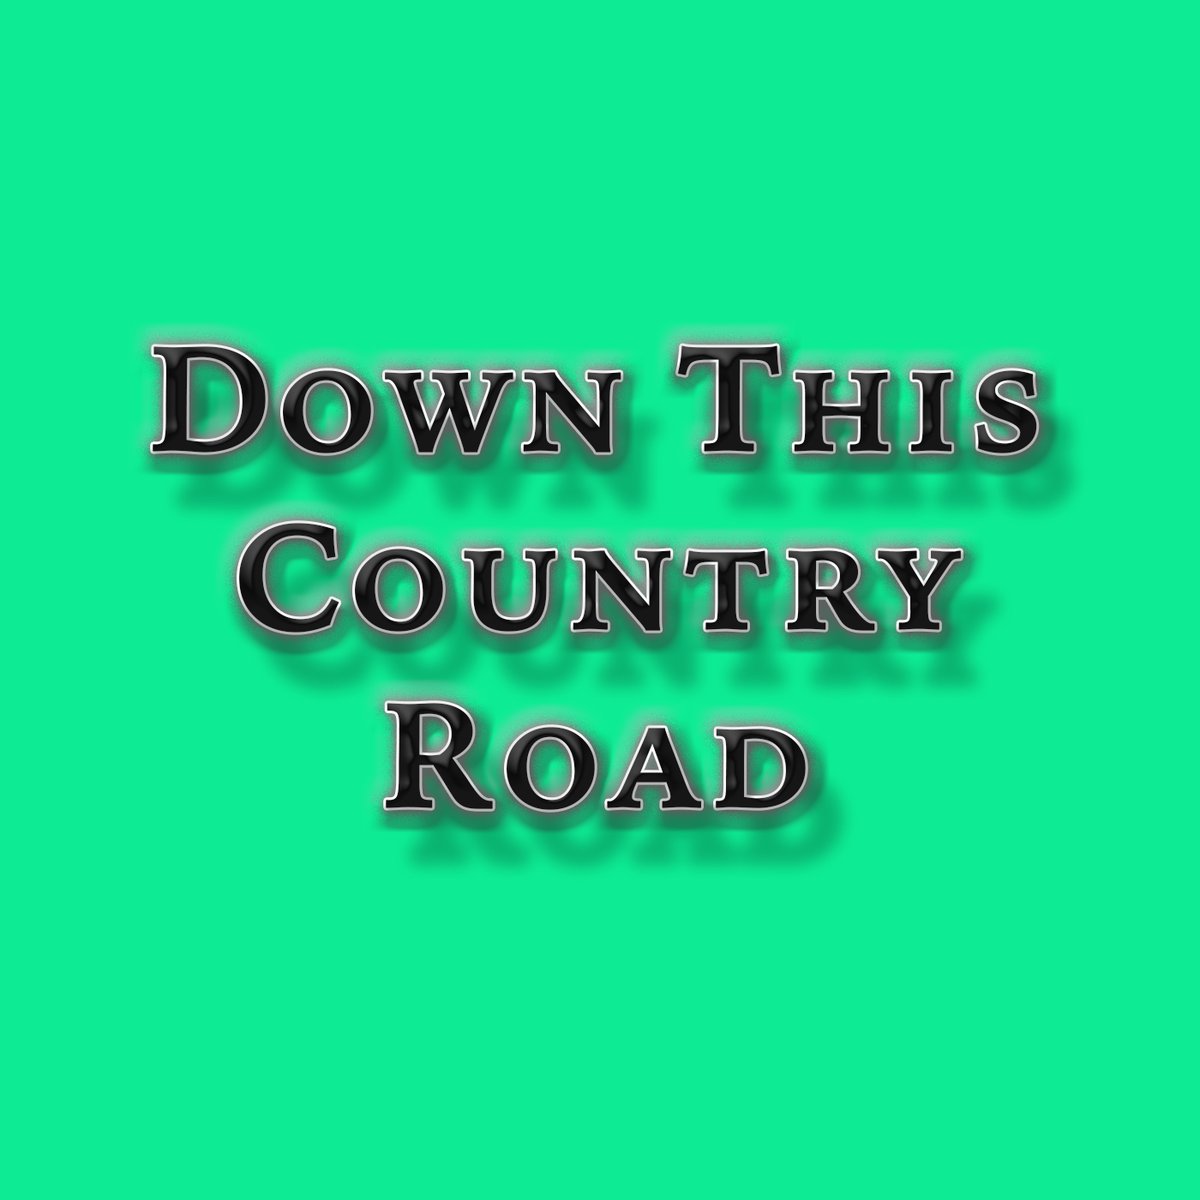 #spotify #playlist - Down This Country Road. Featuring 52 Country Singers, 67 Country Songs. With Artists like - @PeytanPorter, @neonunionmusic, @Joshuaraywalke5, @Ryan_Larkins, @GreggBolger, @HawkenHorse, @James_Carothers, & many more. #newcountry #music #musica